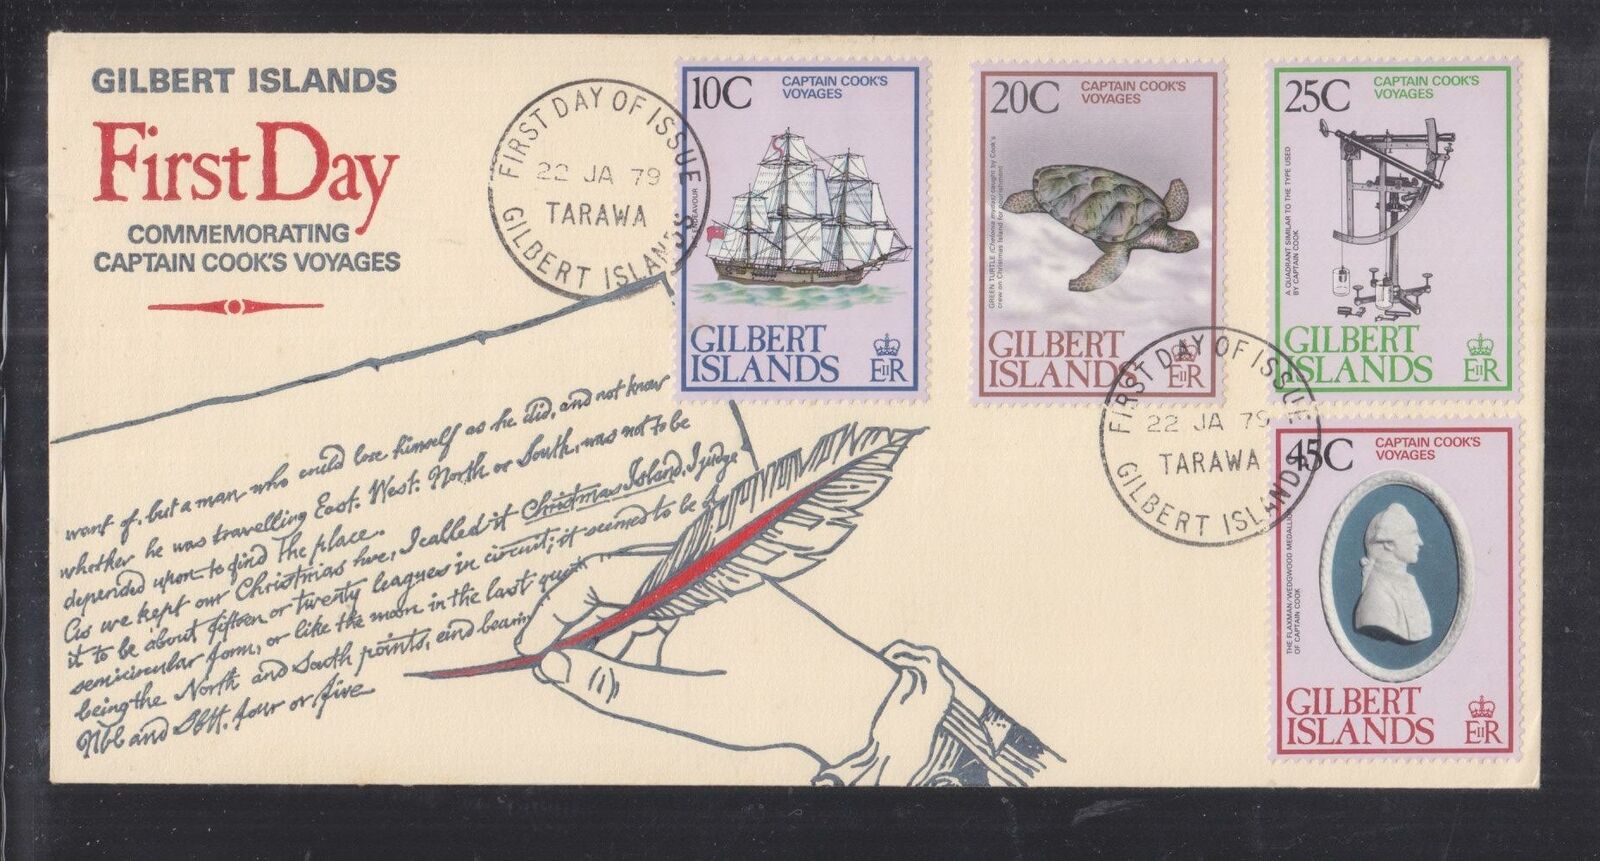 GILBERT ISLANDS 1979 Captain Today's Under blast sales only Cook set of First 4 cover. day